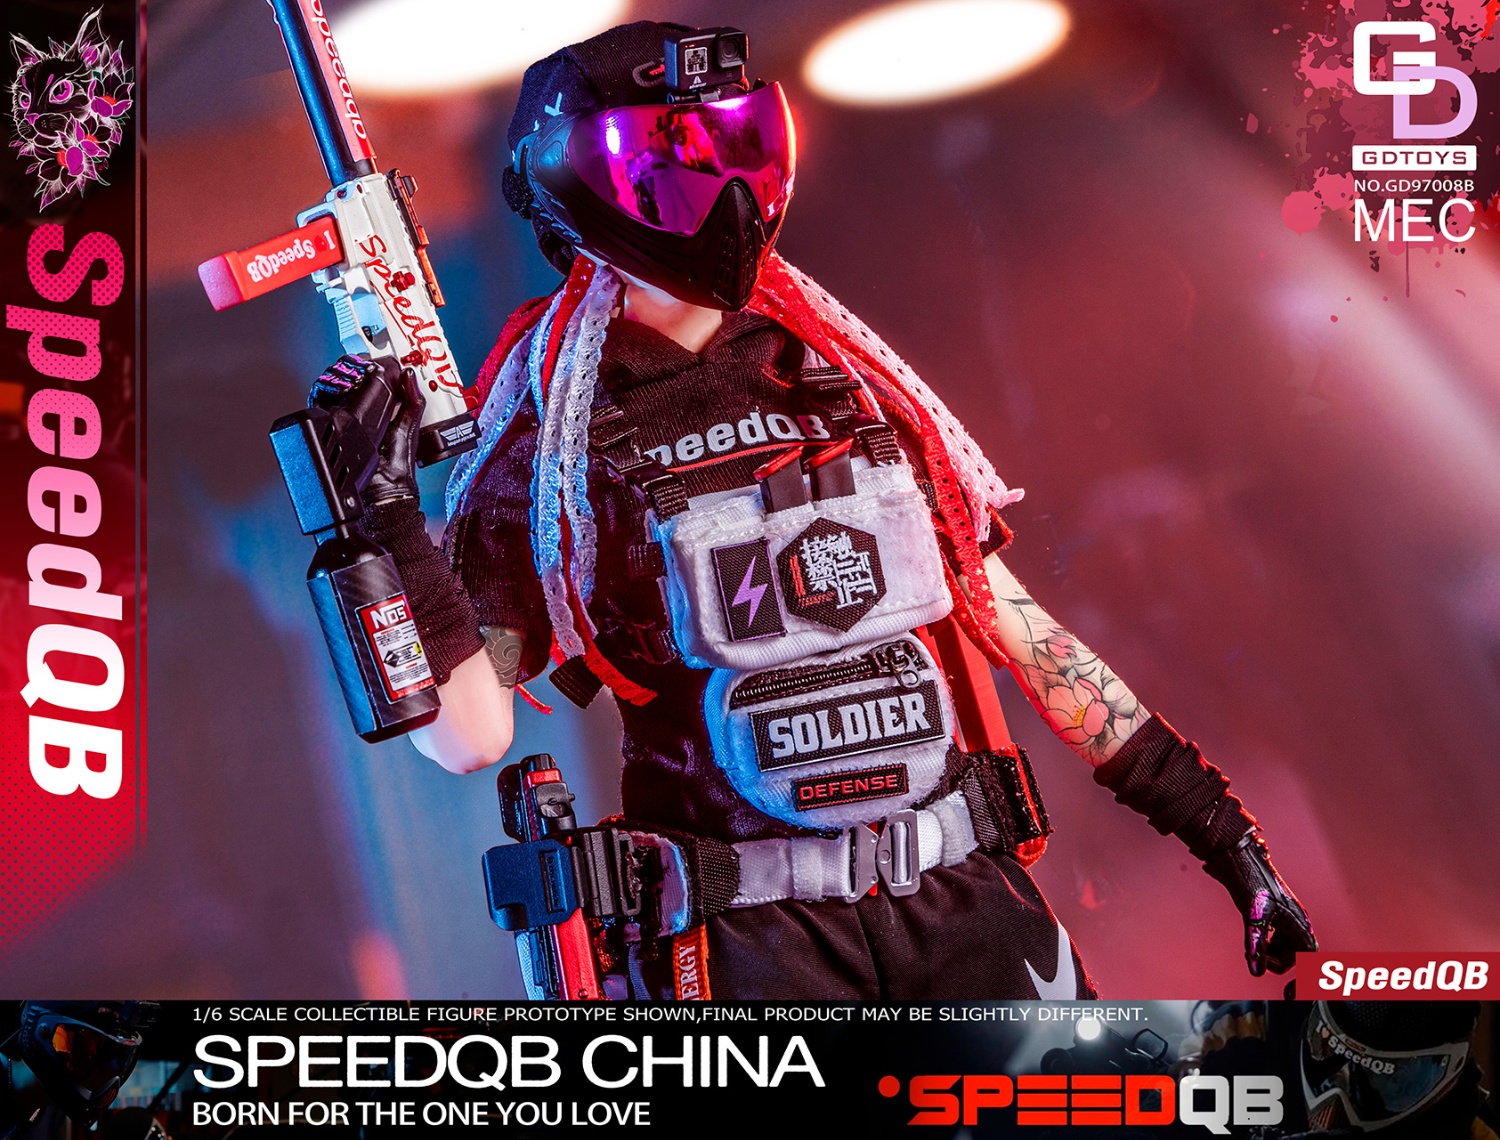 NEW PRODUCT: SpeedQB - Competitive Sports Charge Girl (GD97008B) 04130